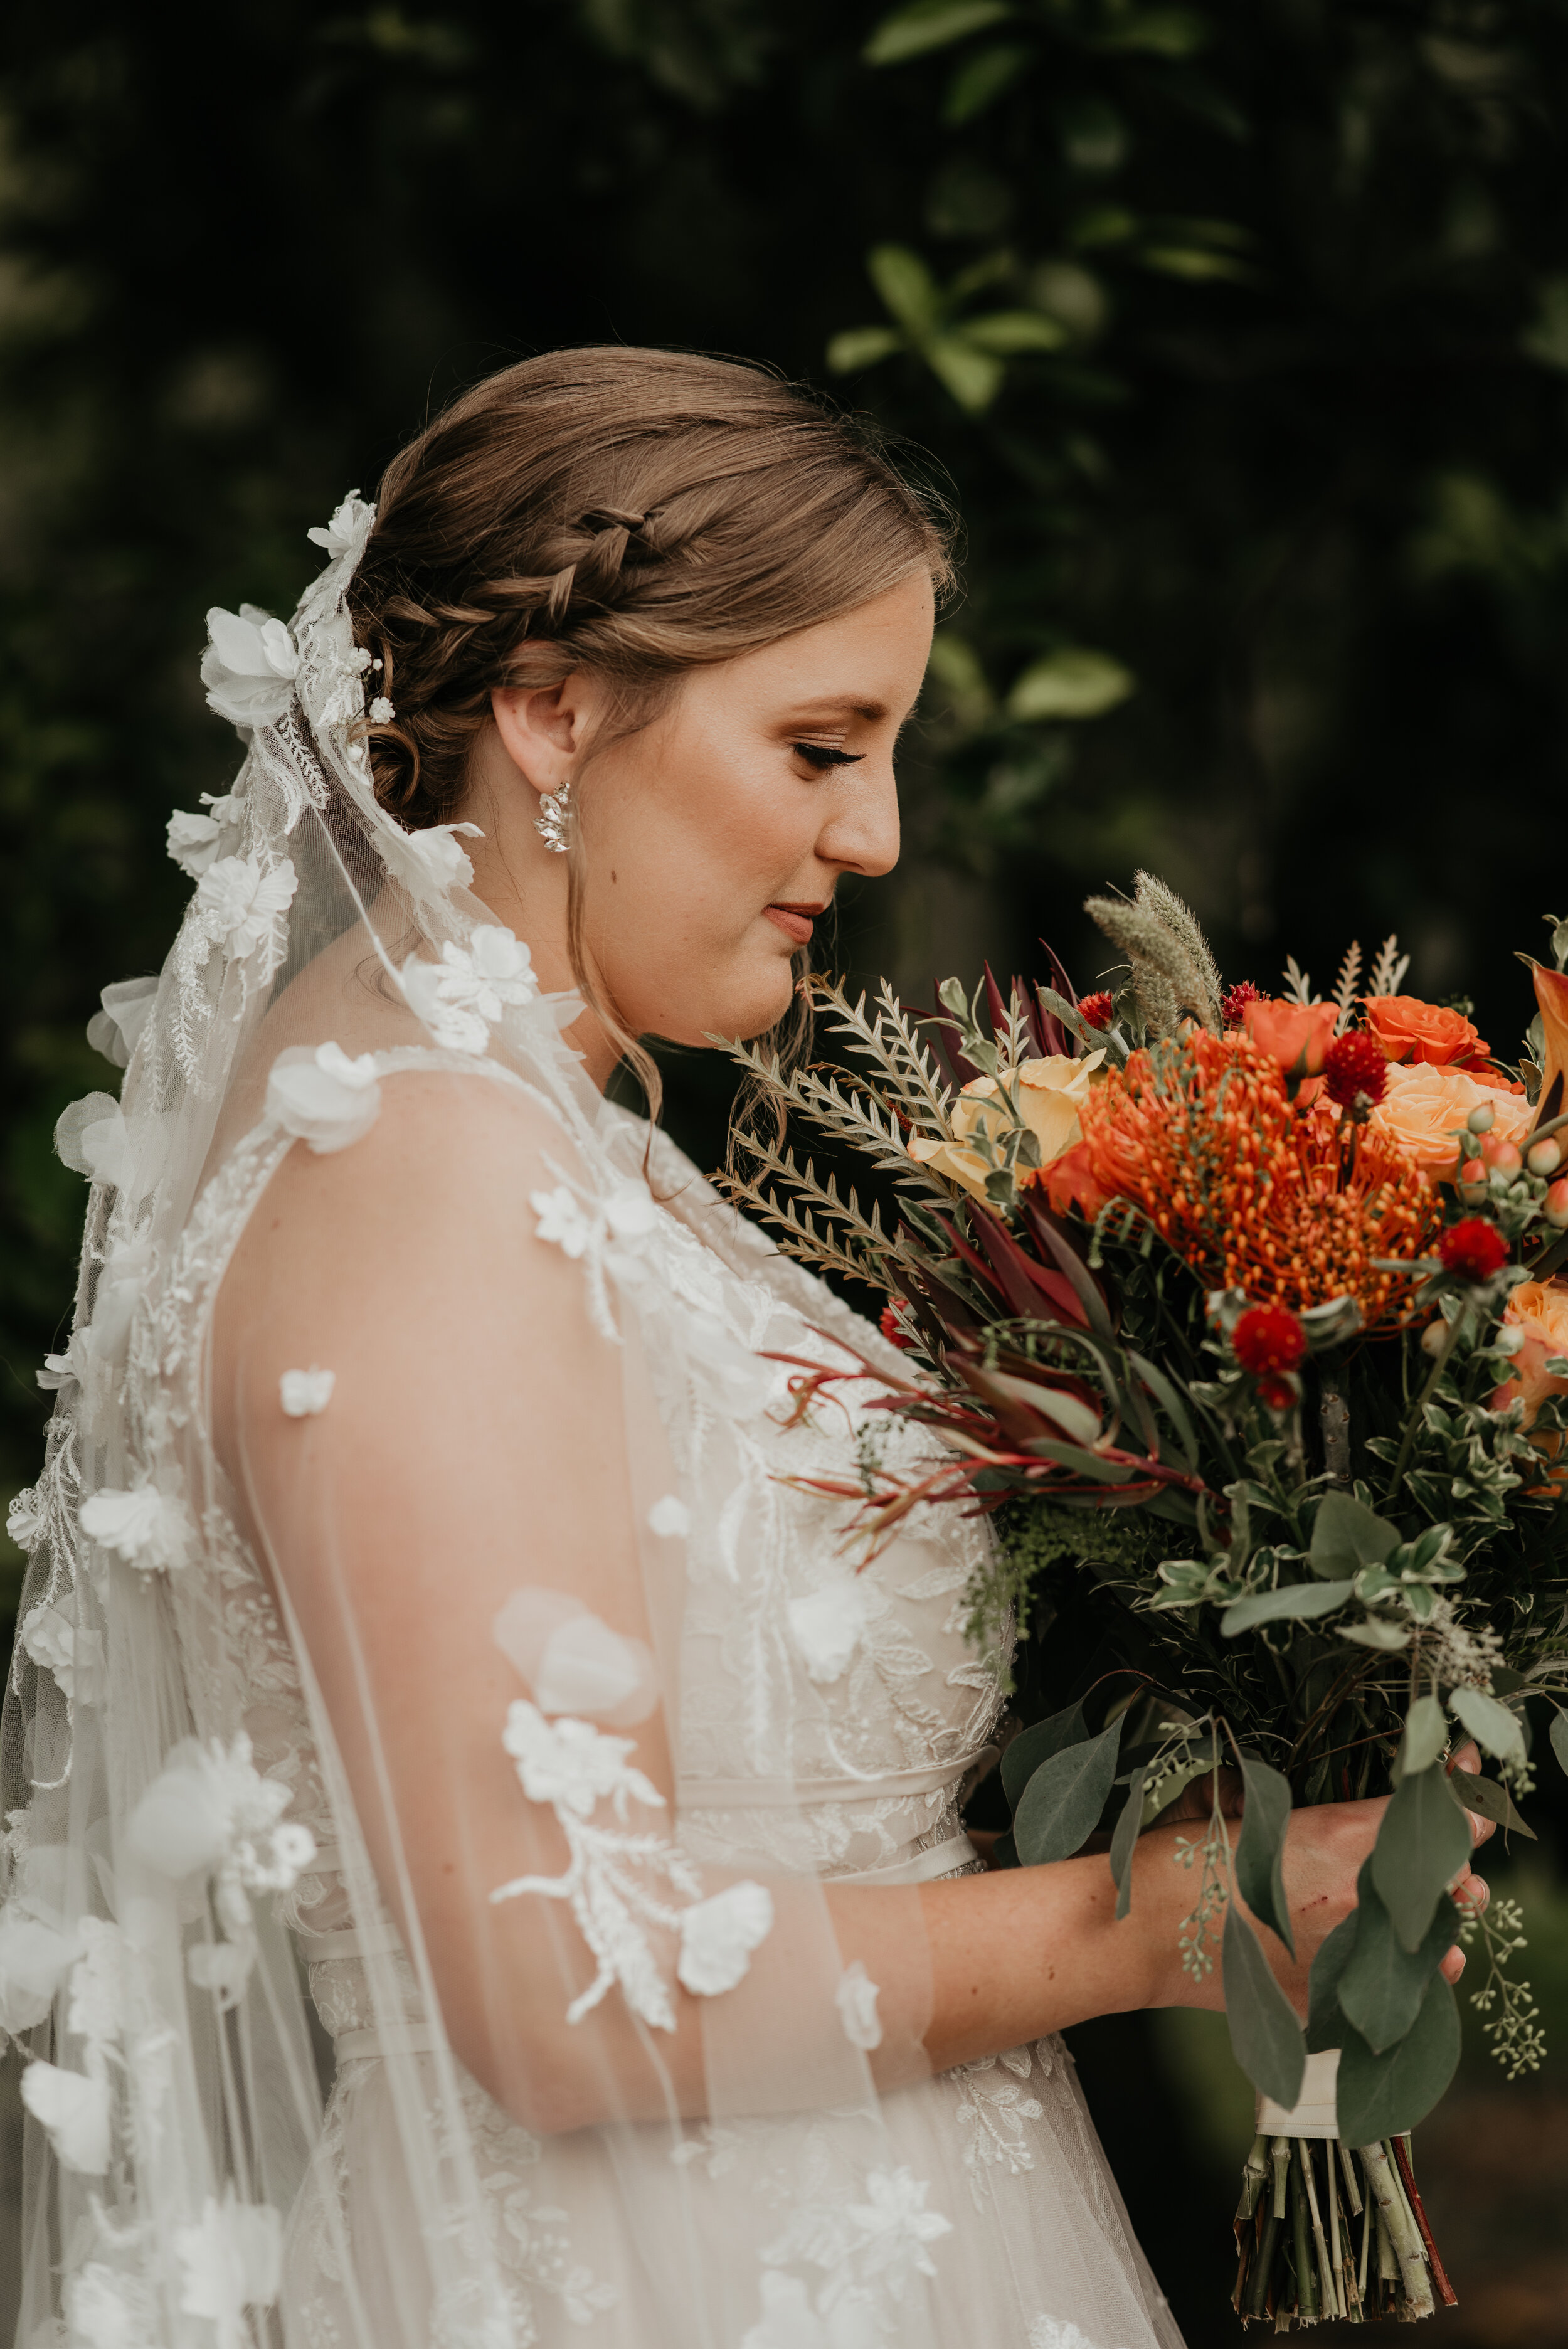 Makeup by Before The Aisle | Dress + Veil by The Dressing Room Celebration (photo by Ashley Dye Photography)